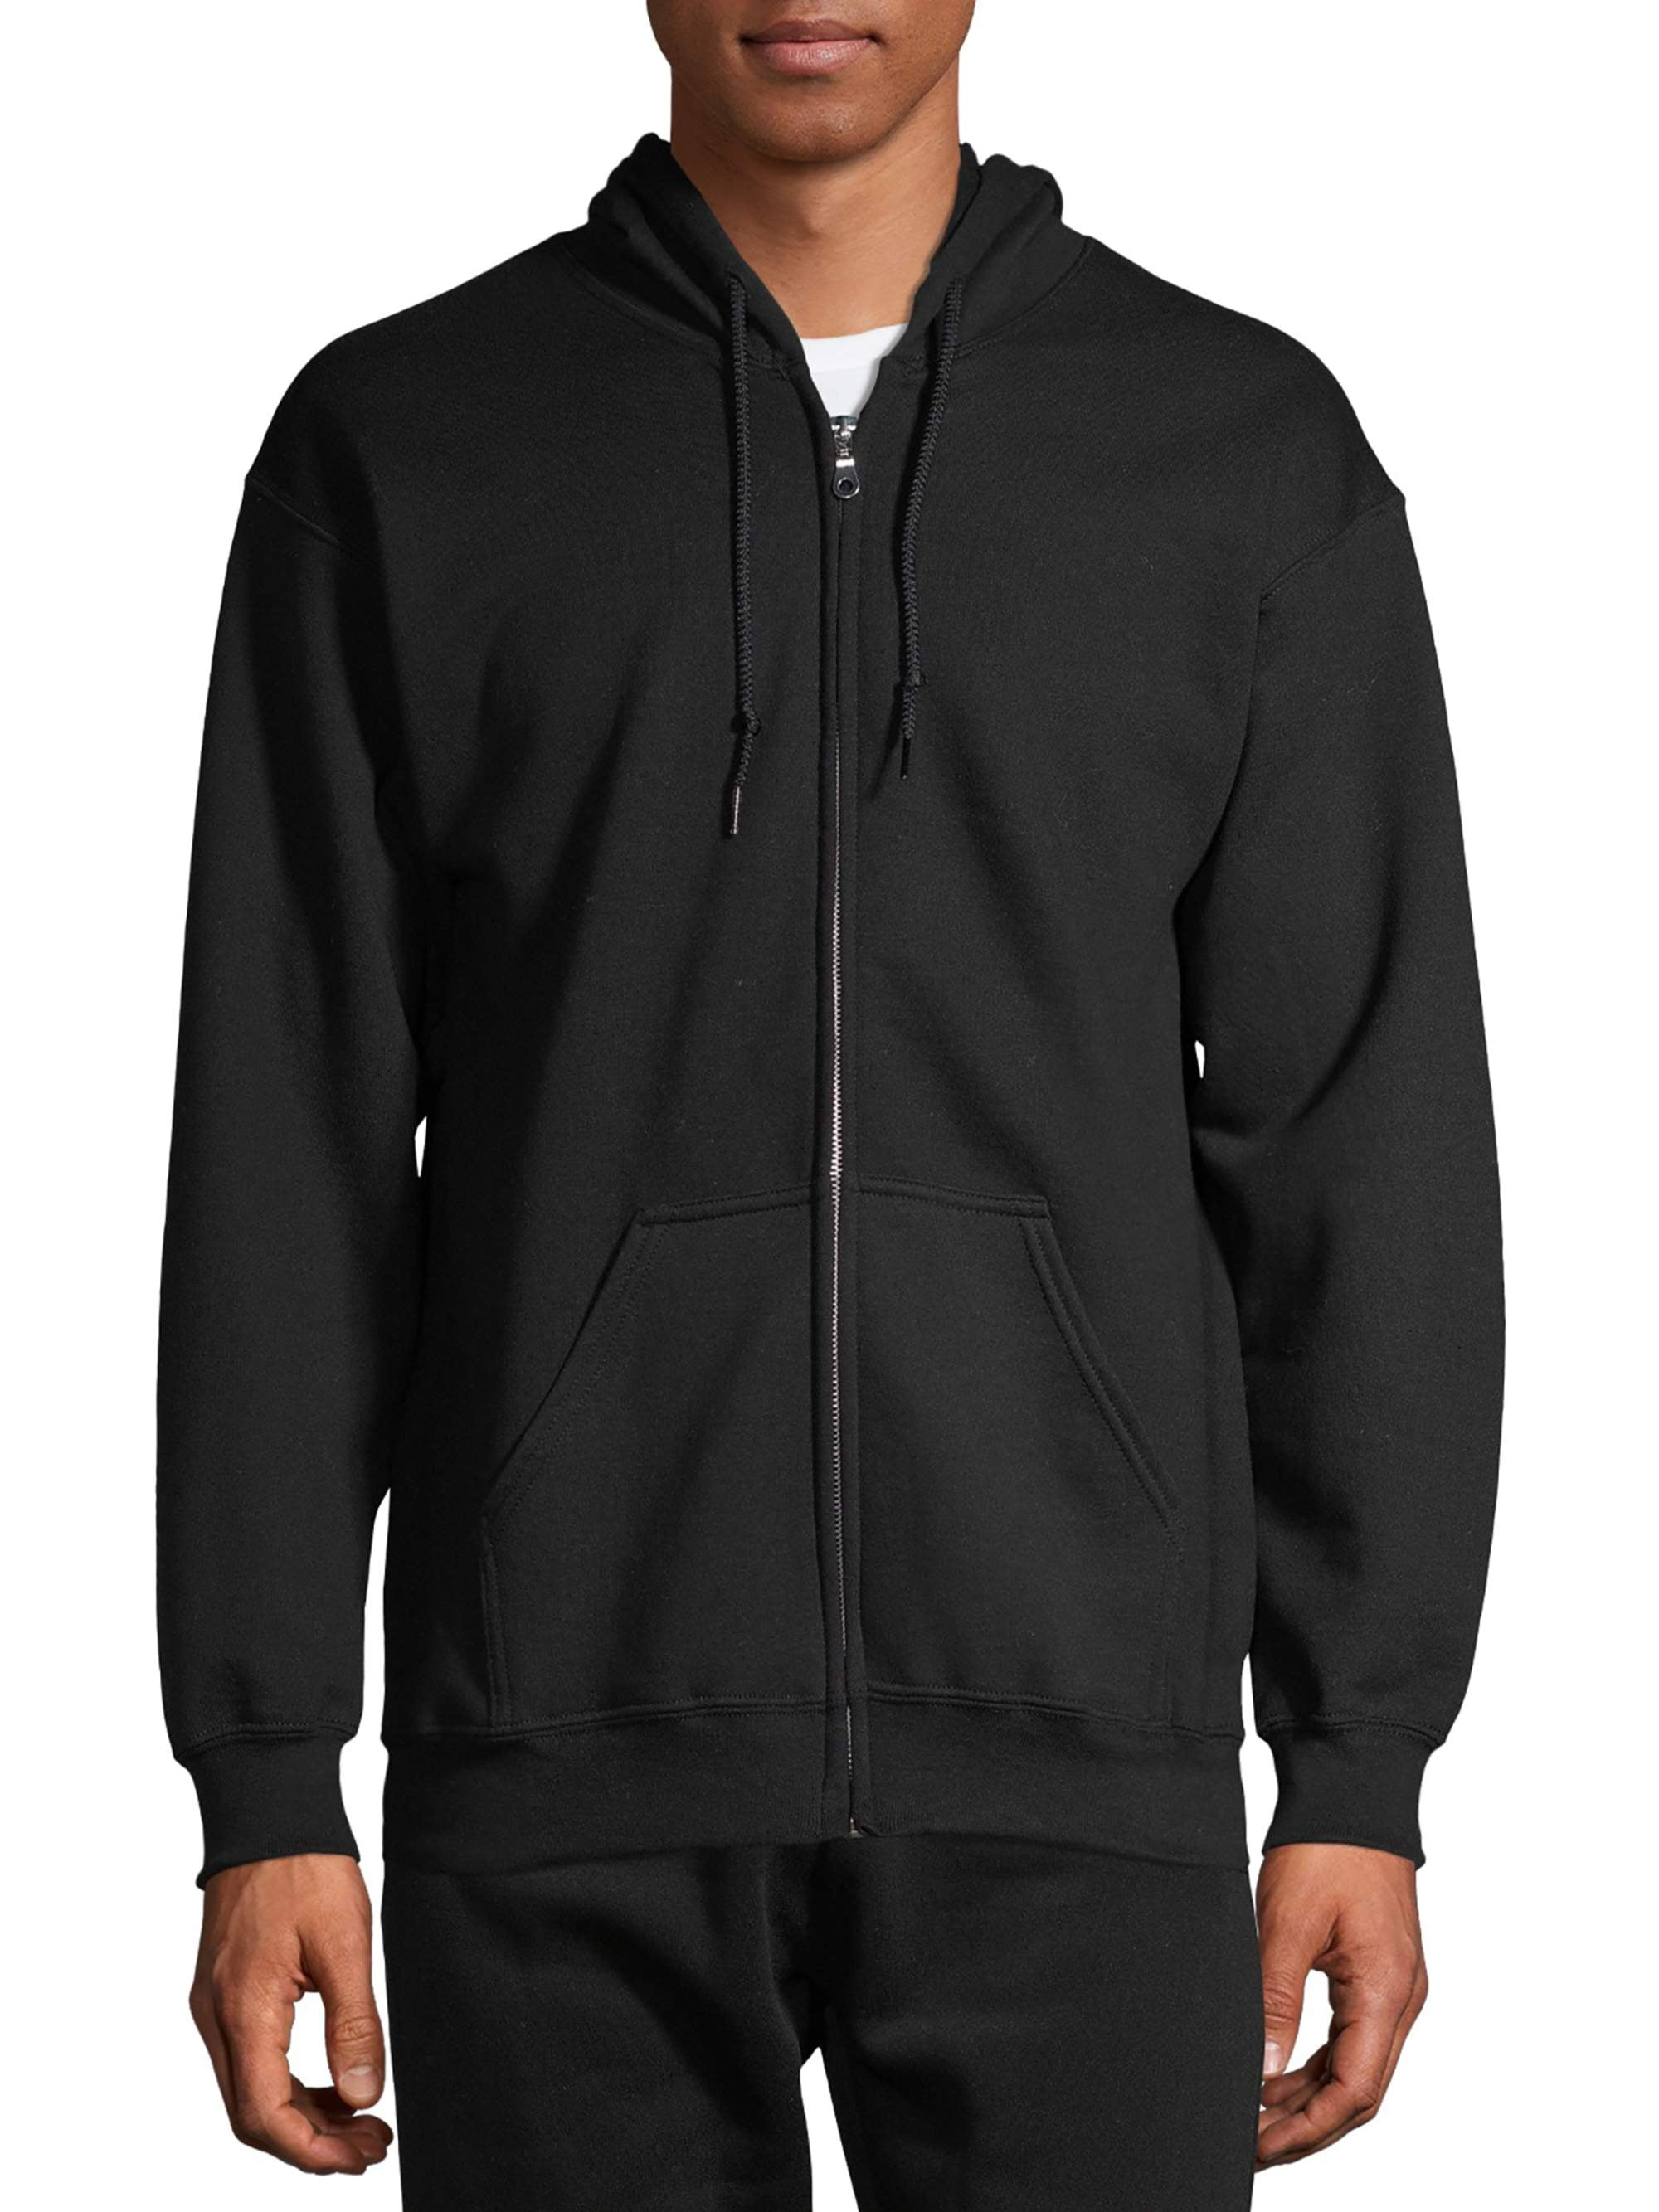 Gildan Heavy Blend Full Zip Hoodie - Small to 3XL in Zambia at ZMW 795 ...